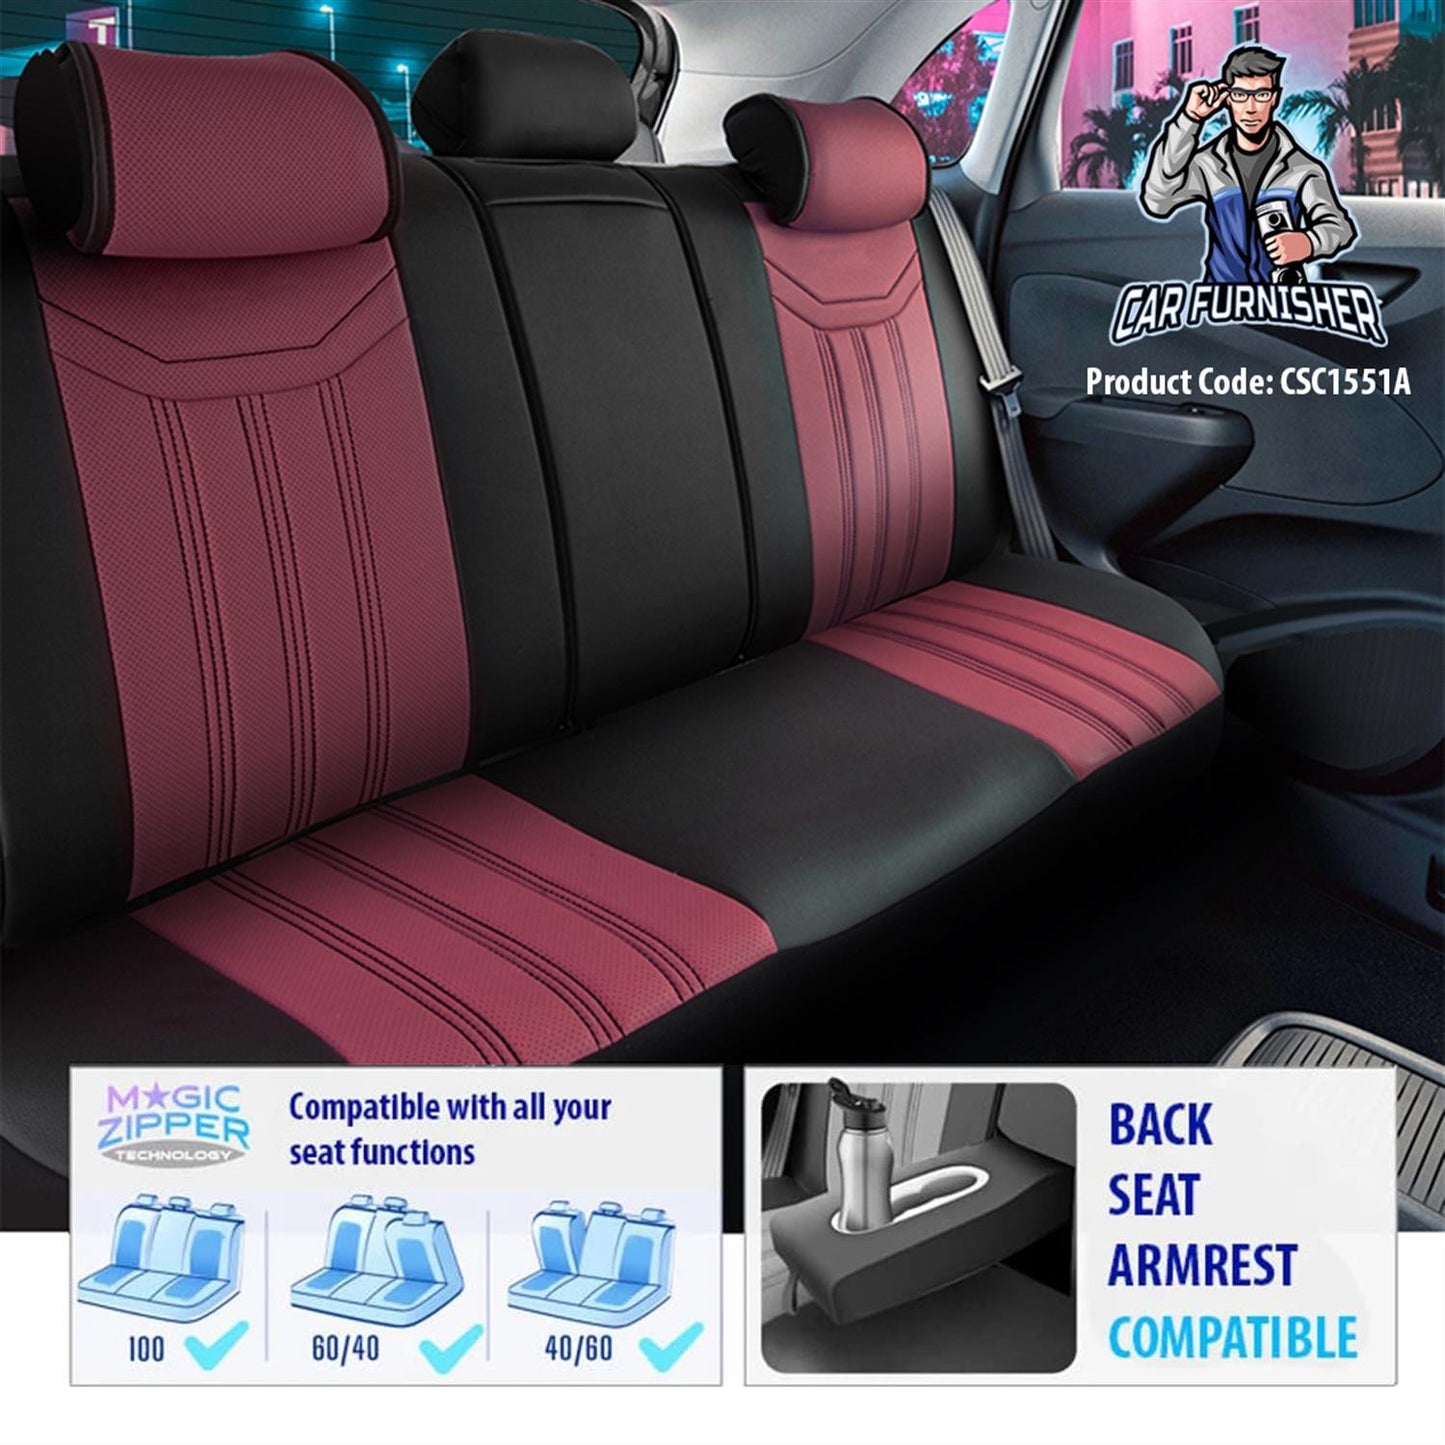 Luxury Car Seat Cover Set (5 Colors) | Miami Series Burgundy Full Leather